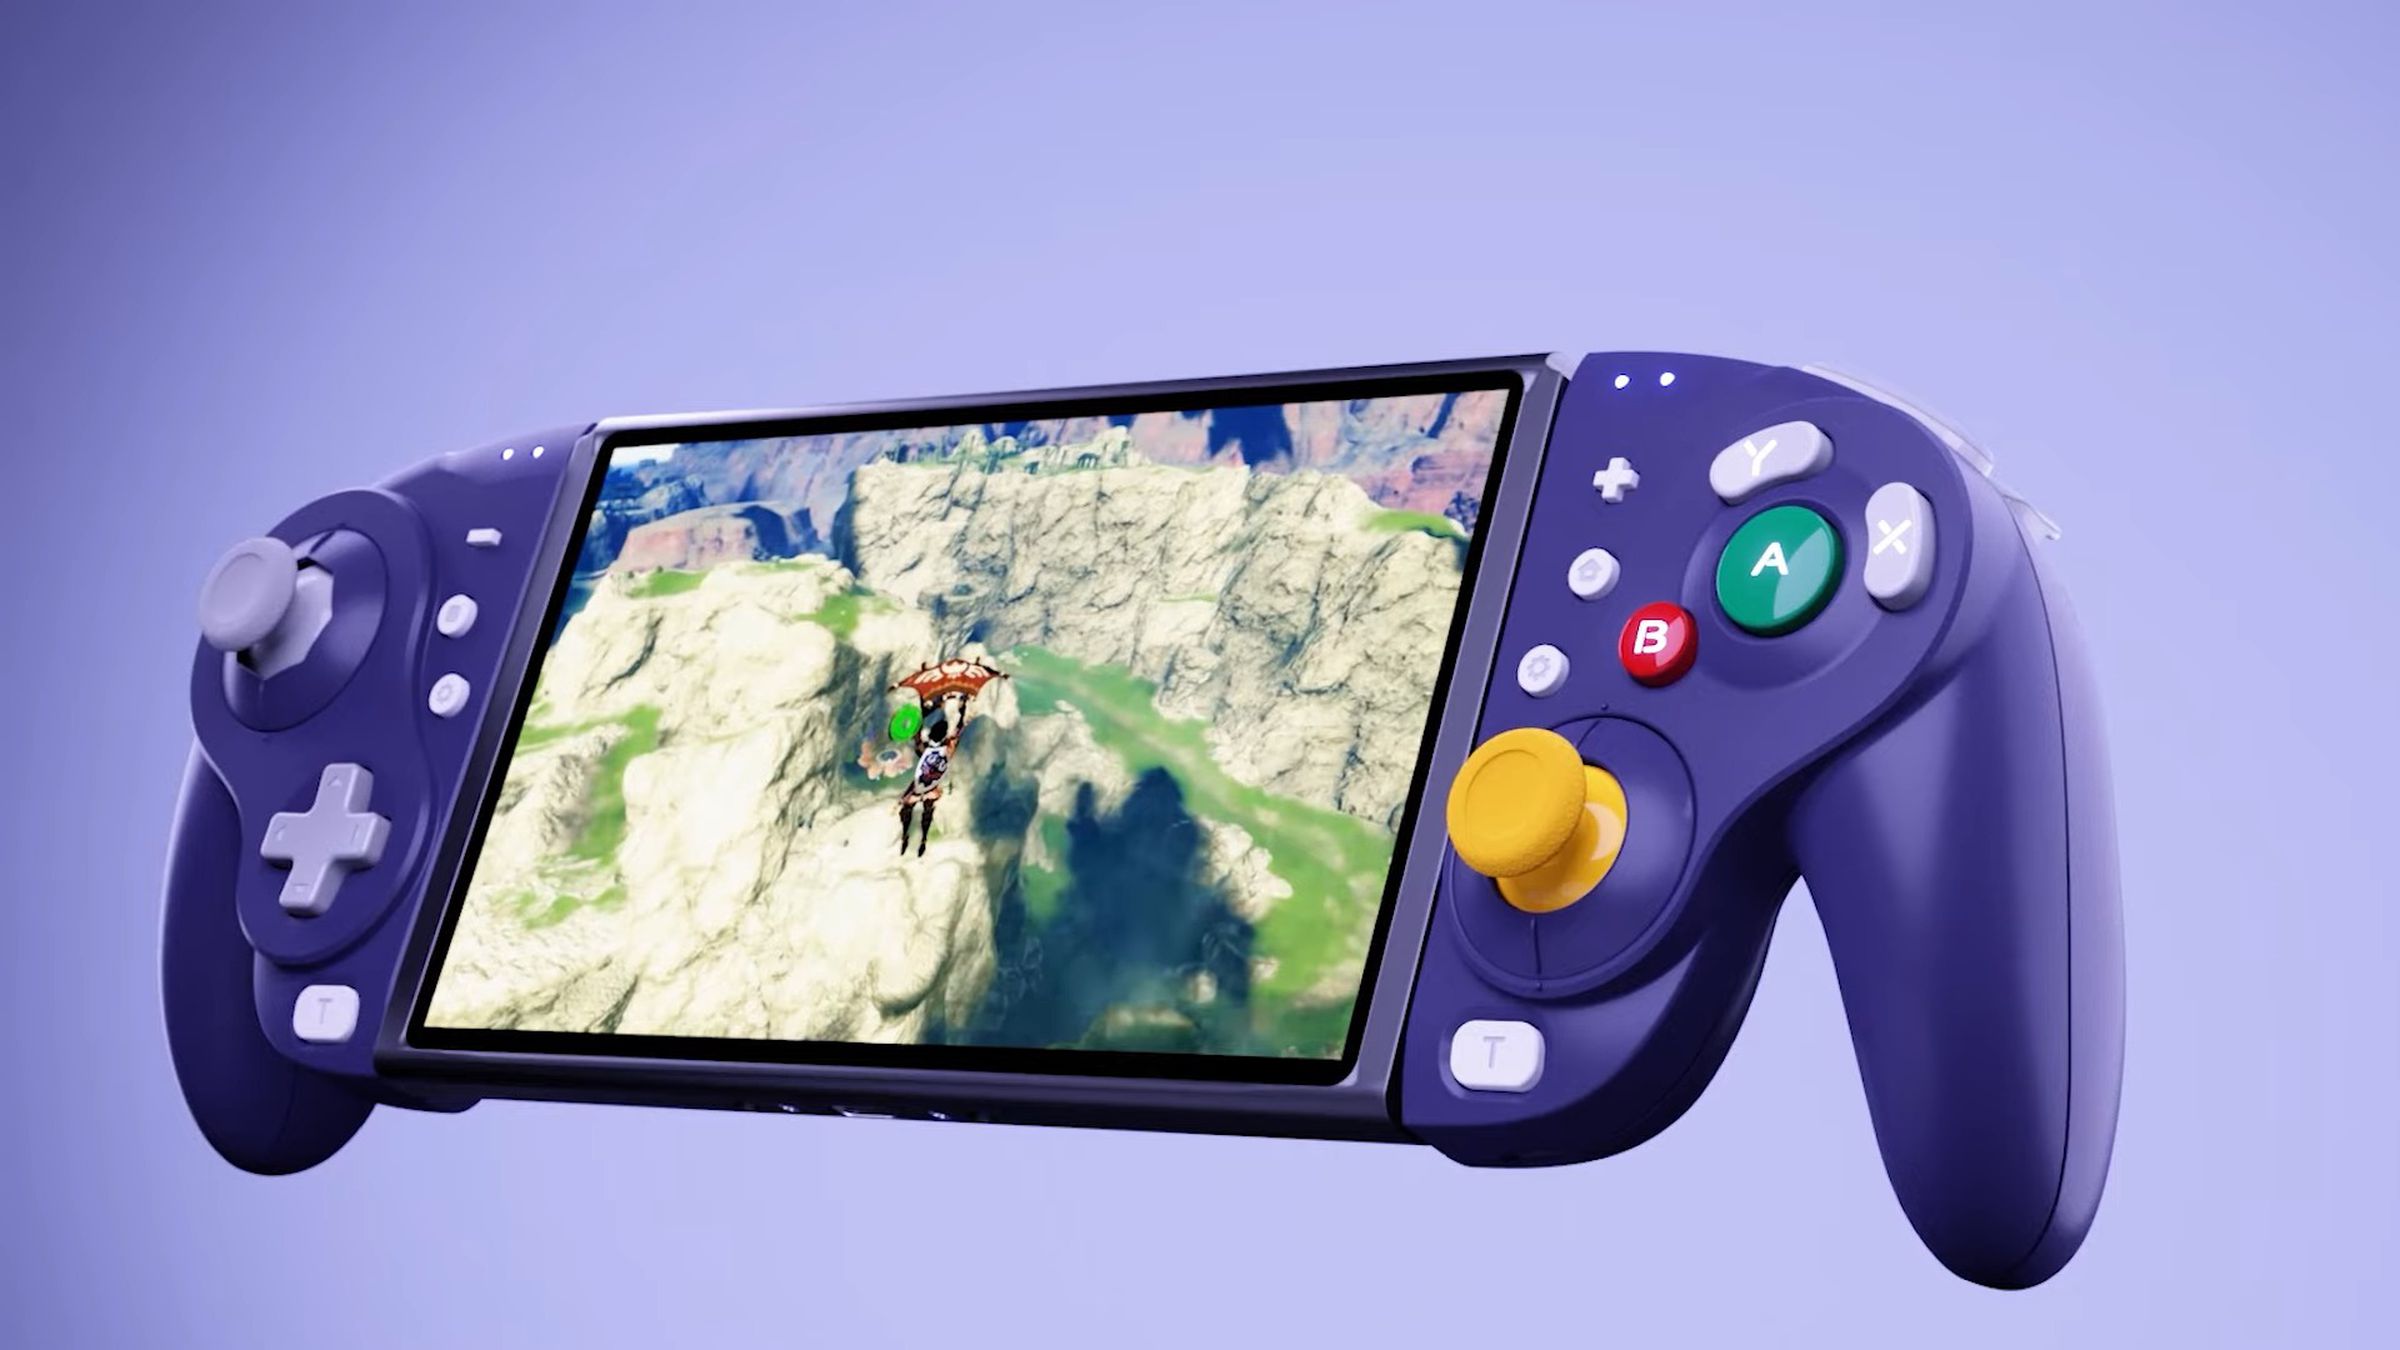 A promotional image of both sides of a NYXI Wizard docked on to a Nintendo Switch playing The Legend of Zelda: Breath of the Wild.